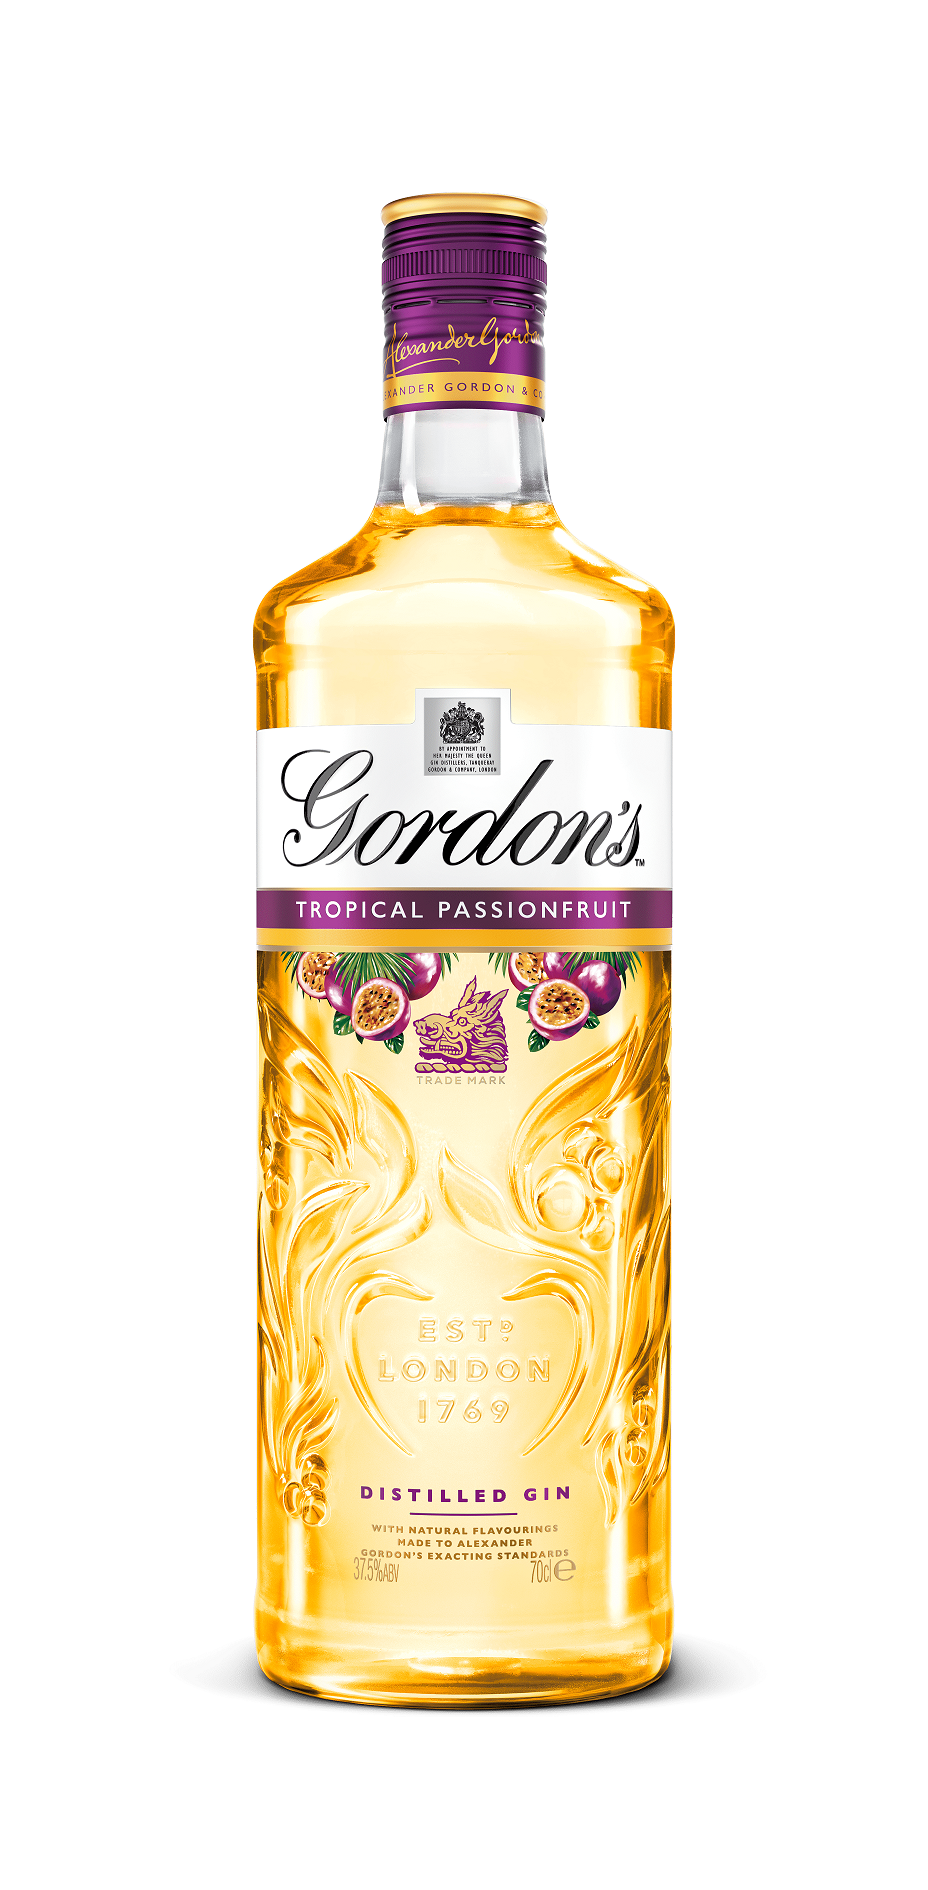 Gordon’s launches Tropical Passionfruit distilled gin